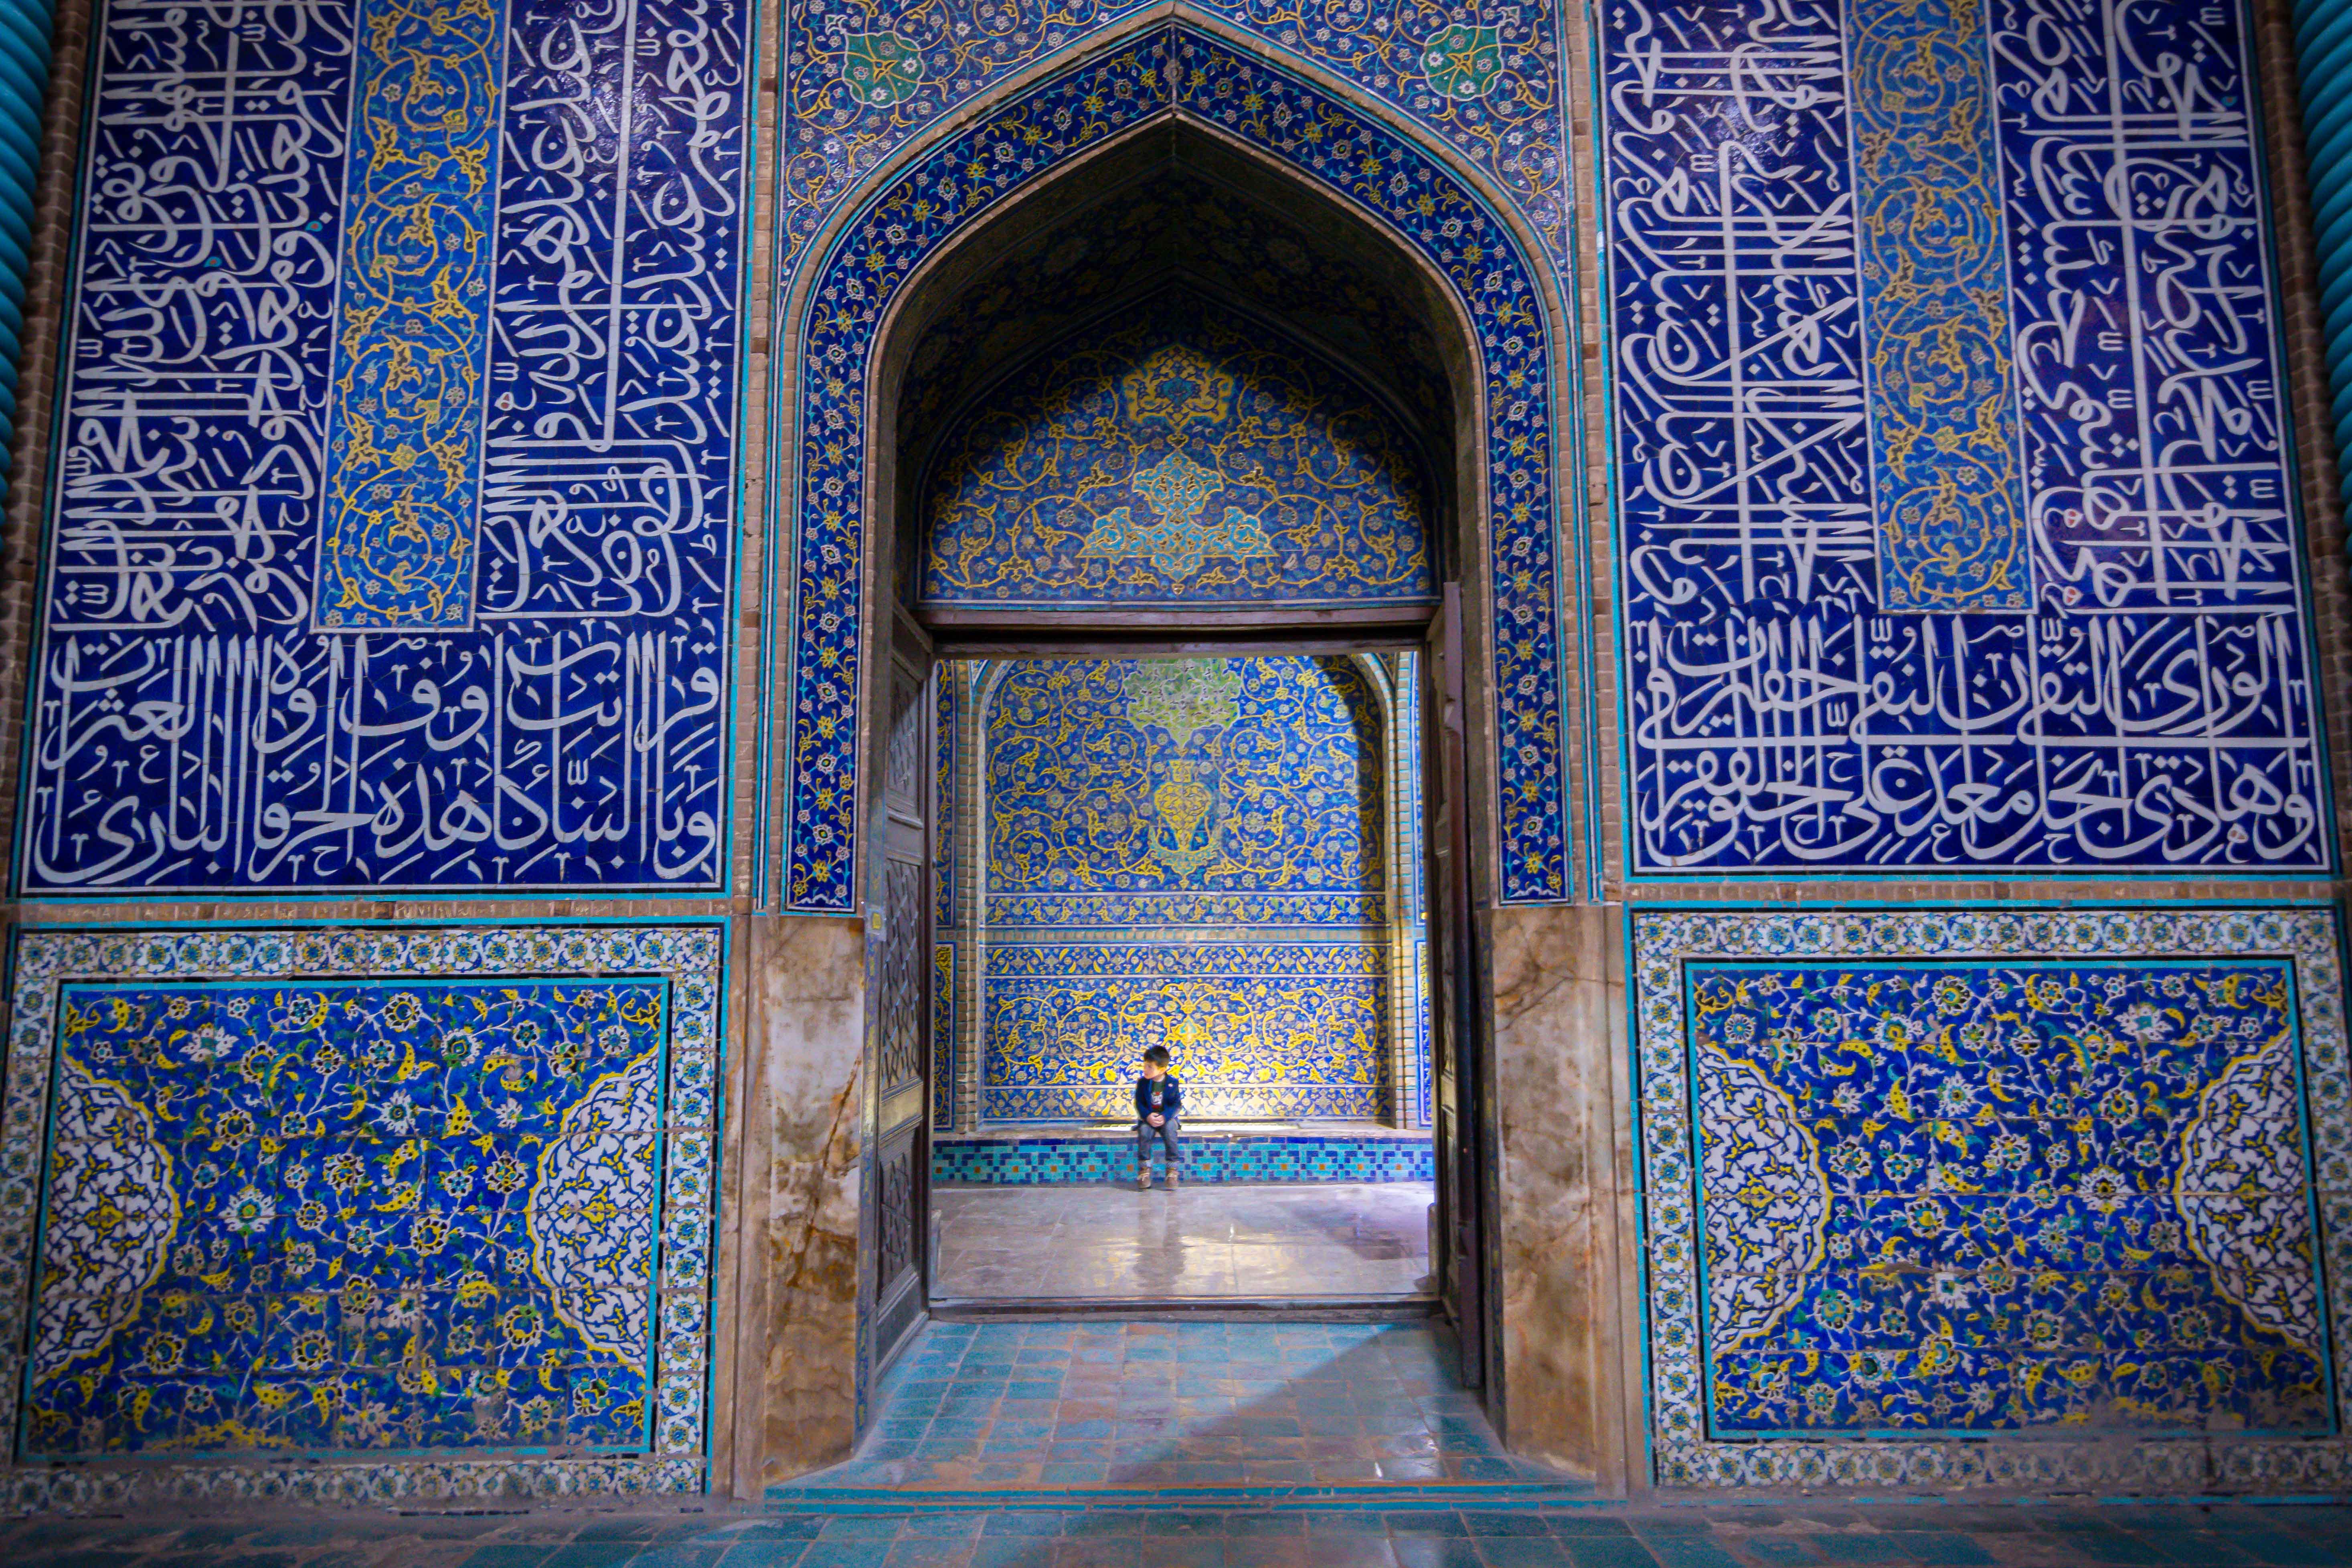 Tranquil, symmetrical and captivating - I often found myself in deep contemplation, just like this young boy in Jameh Mosque of Isfahan. Iran is architecturally unparalleled and nowhere is this more apparent than by stepping foot into notable mosques such as Shah Cheragh or Nasir al-Mulk in Shiraz.